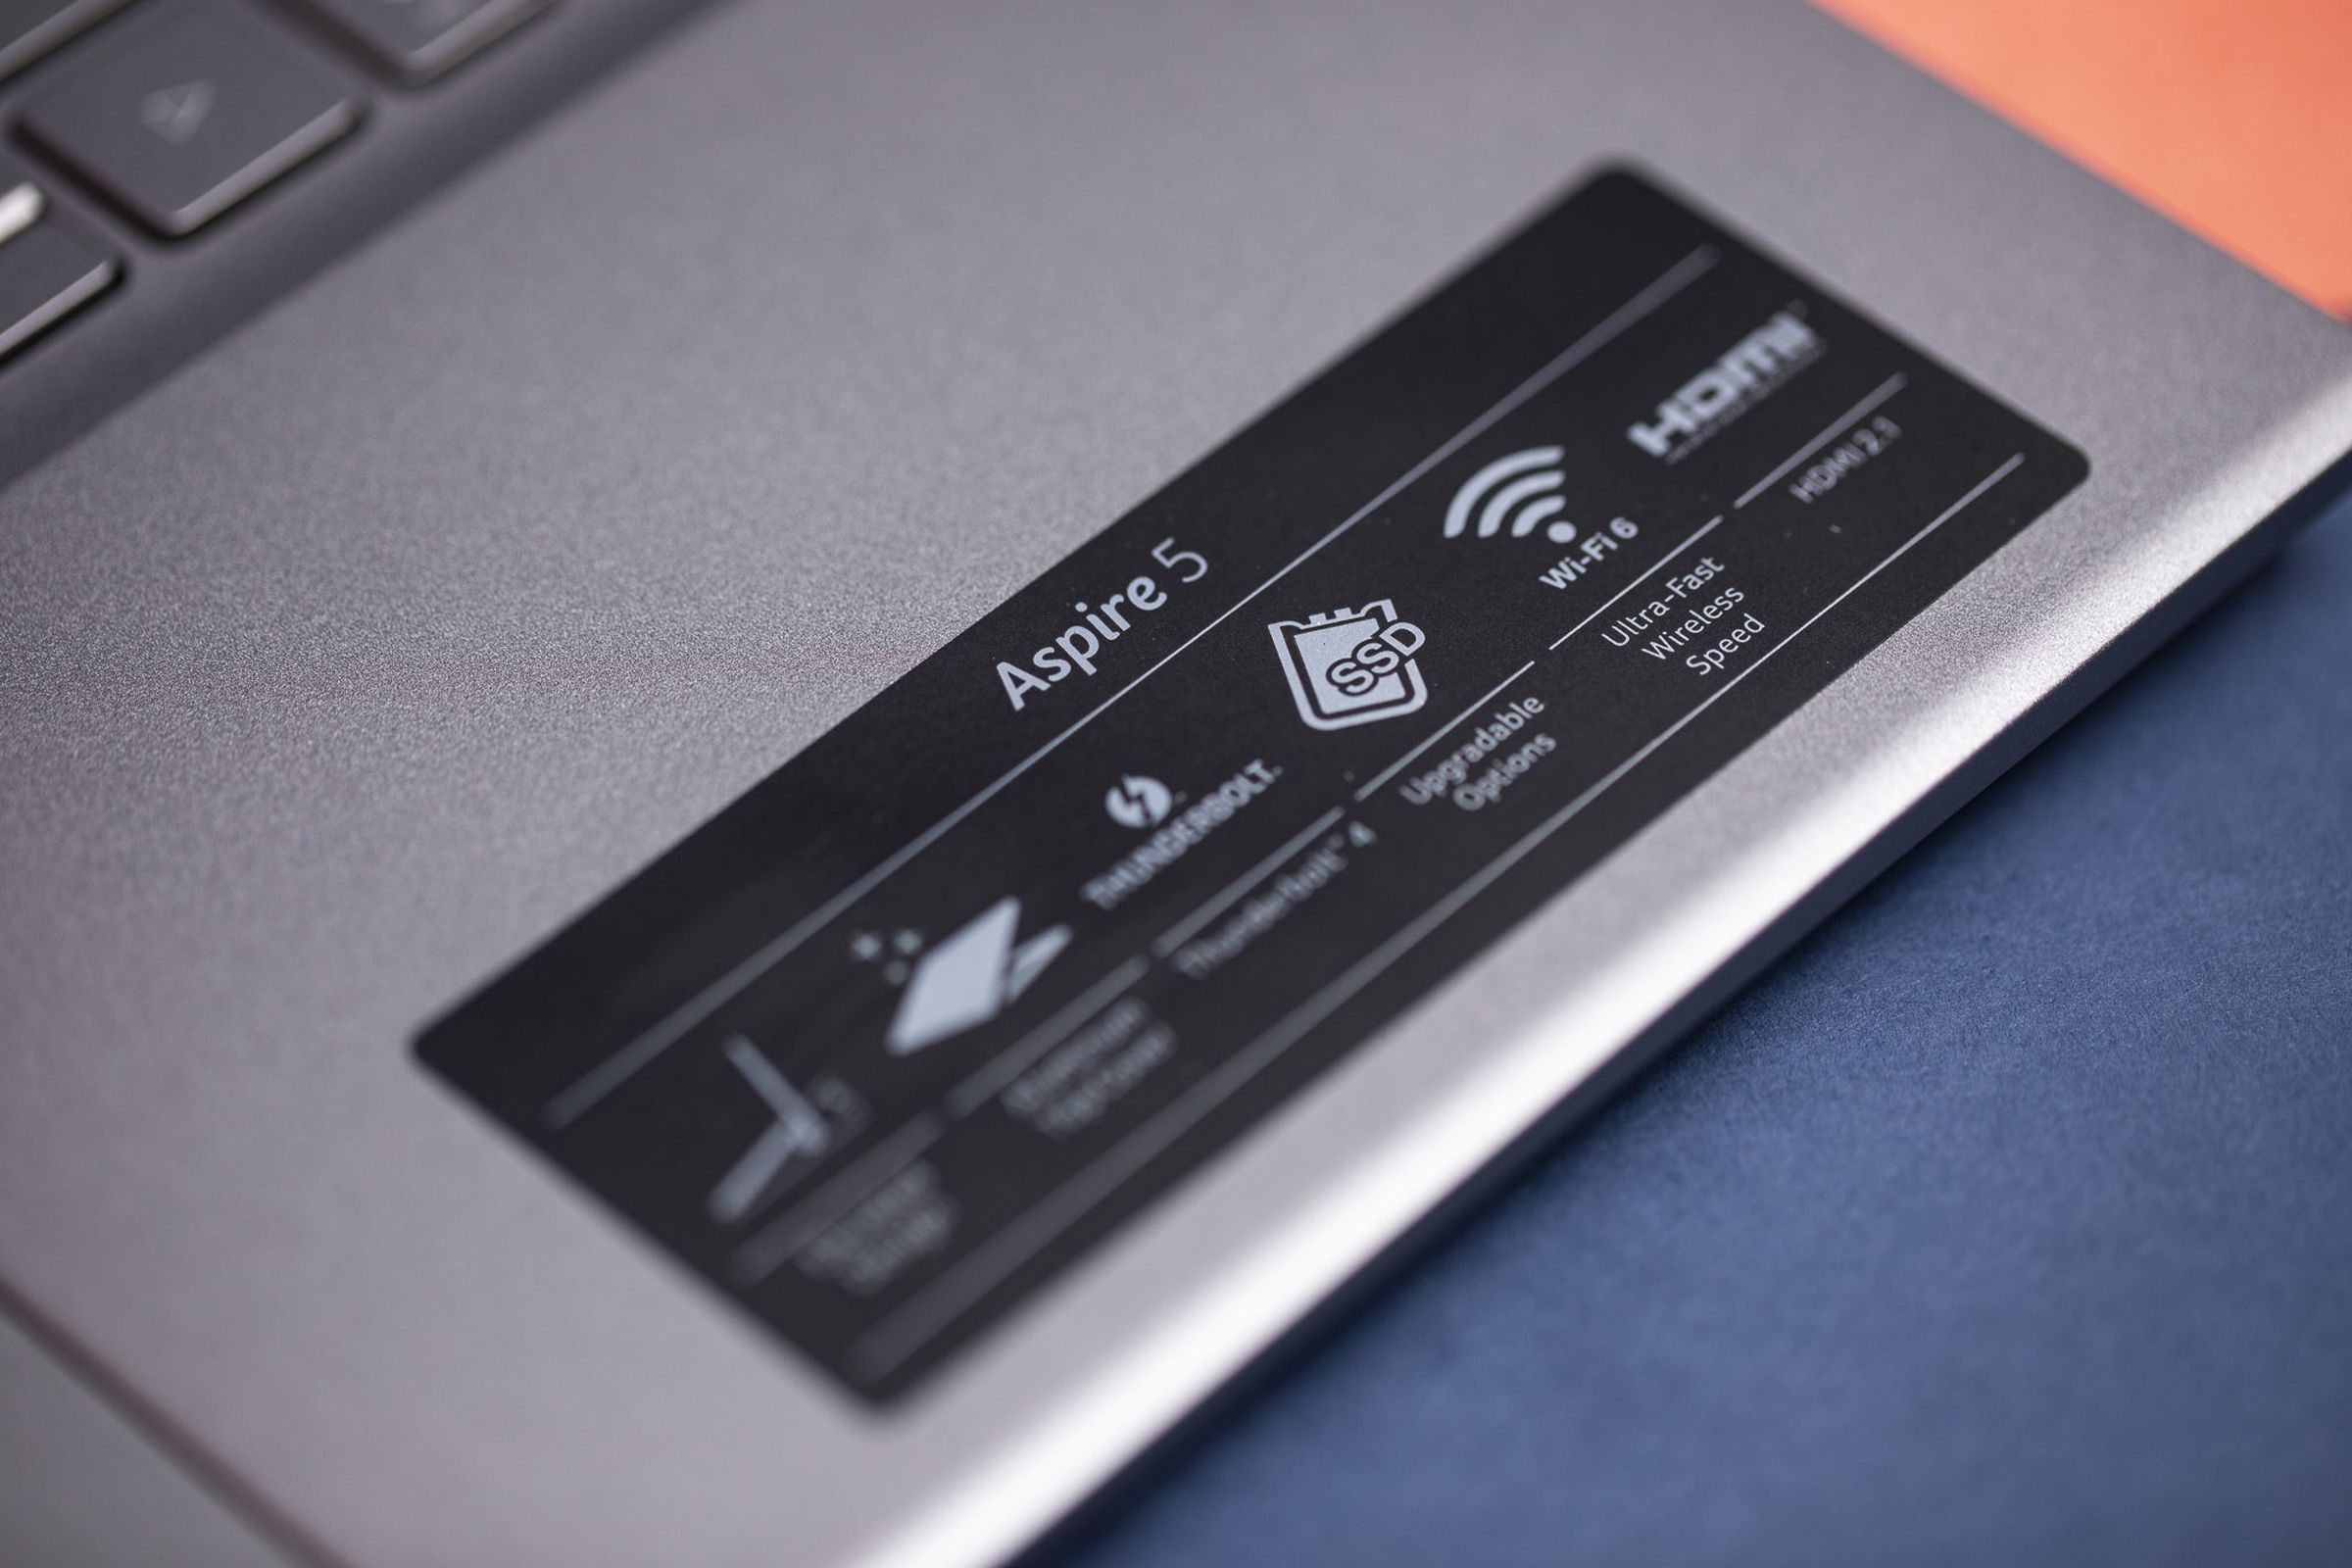 The sticker on the right palm rest of the Acer Aspire 5. Visible text reads SSD Upgradable Options and Wi-Fi 6 ultra-fast wireless speed.